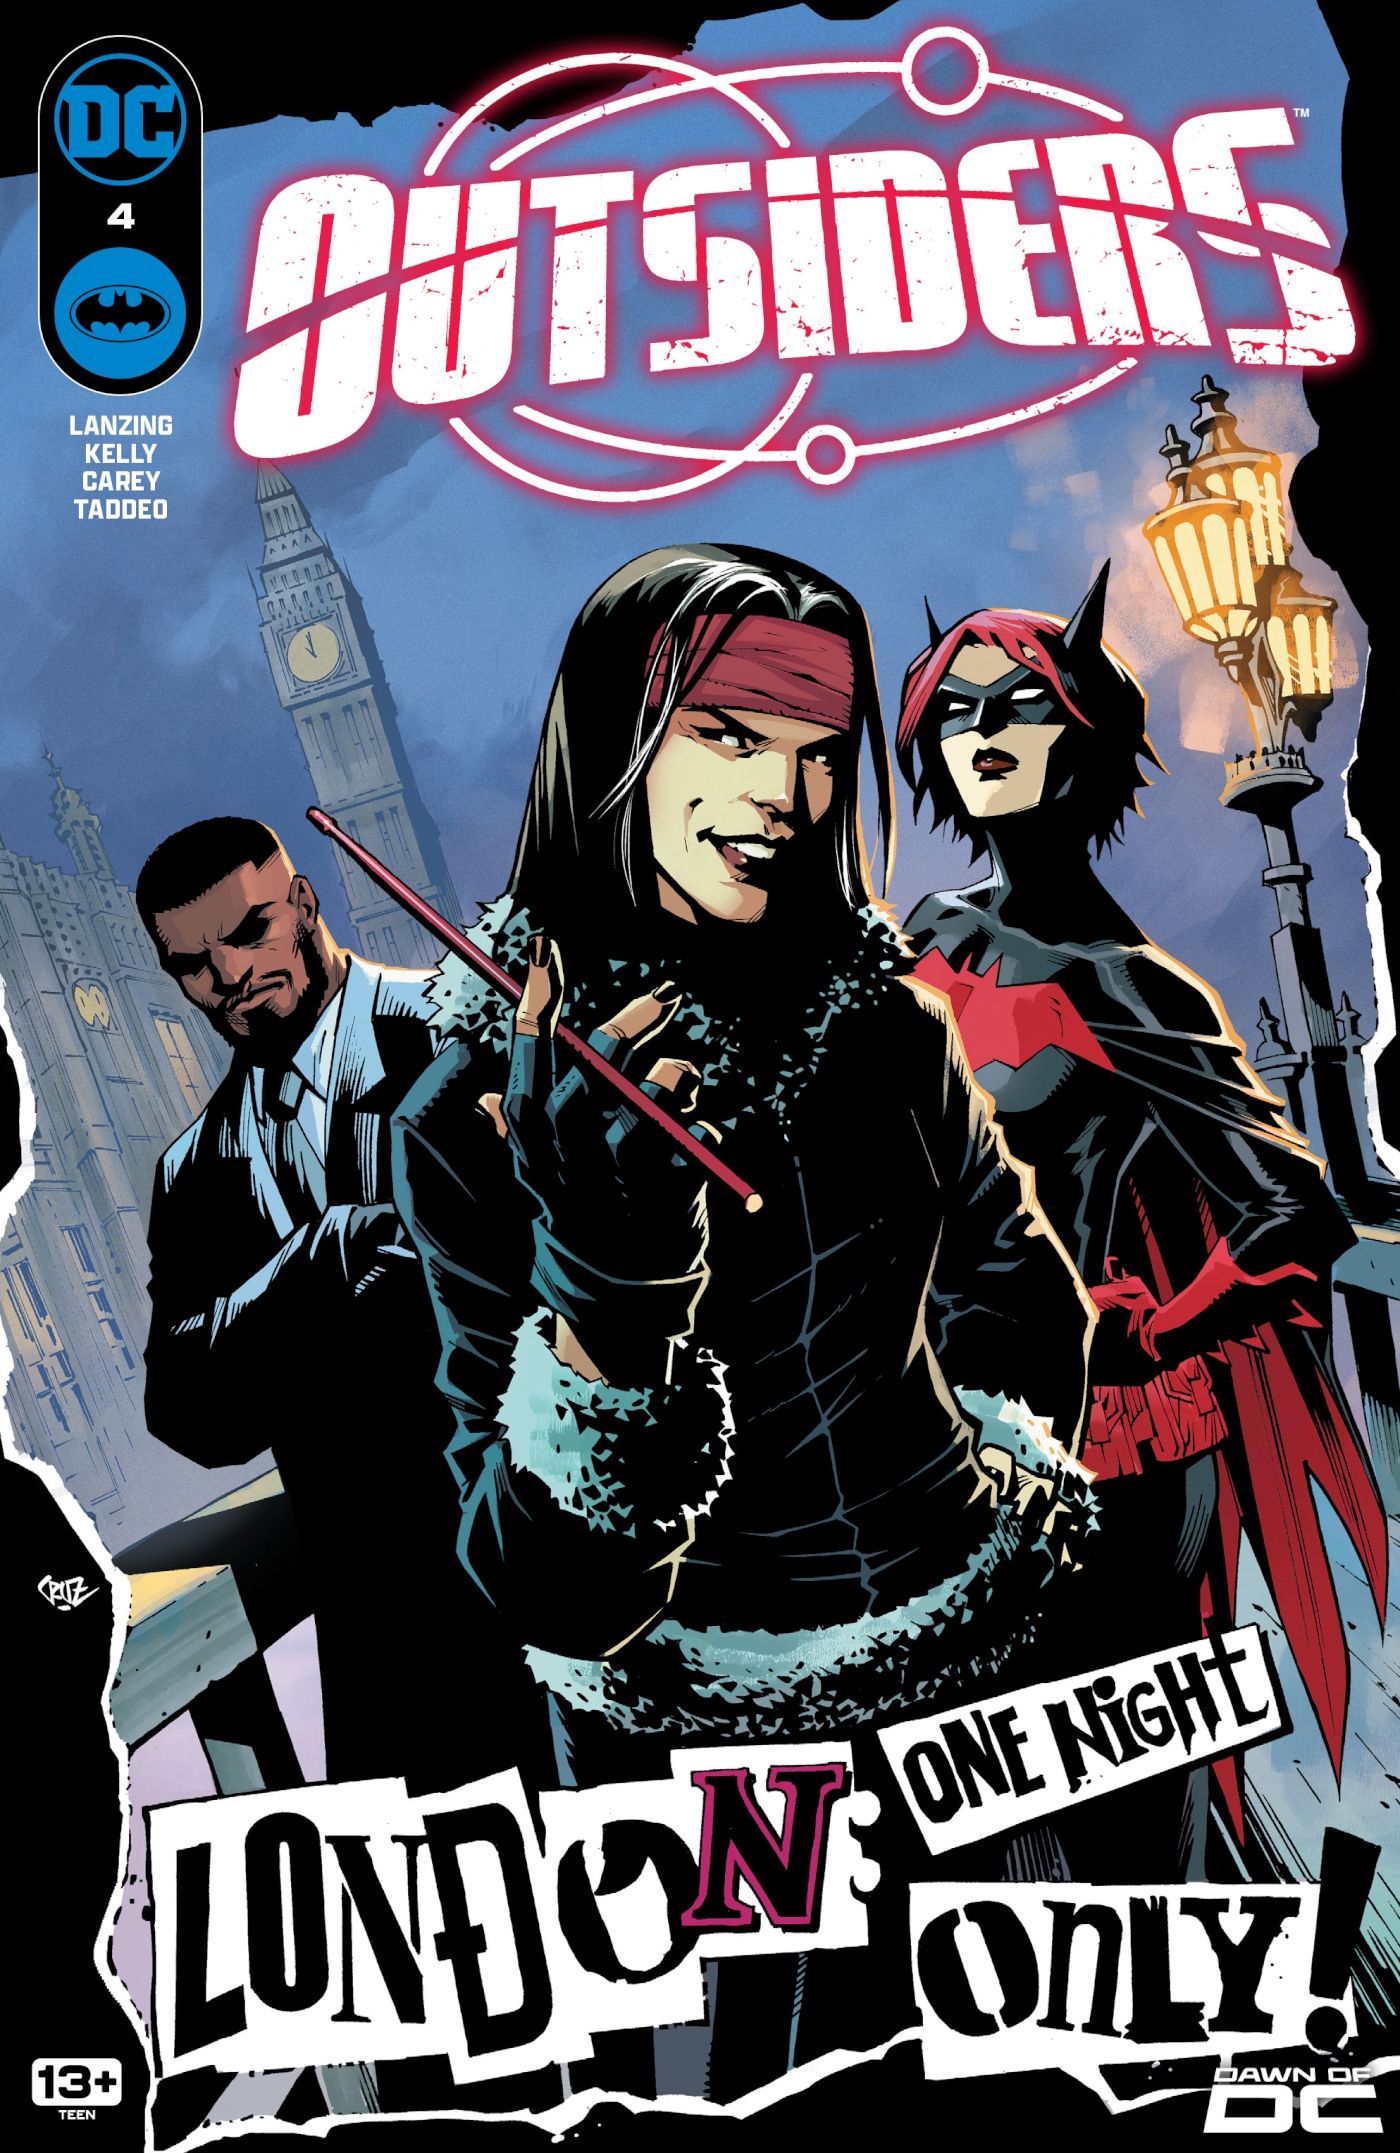 Outsiders 4 Main Cover: Drummers, Luke Fox, and Batwoman pose in London.